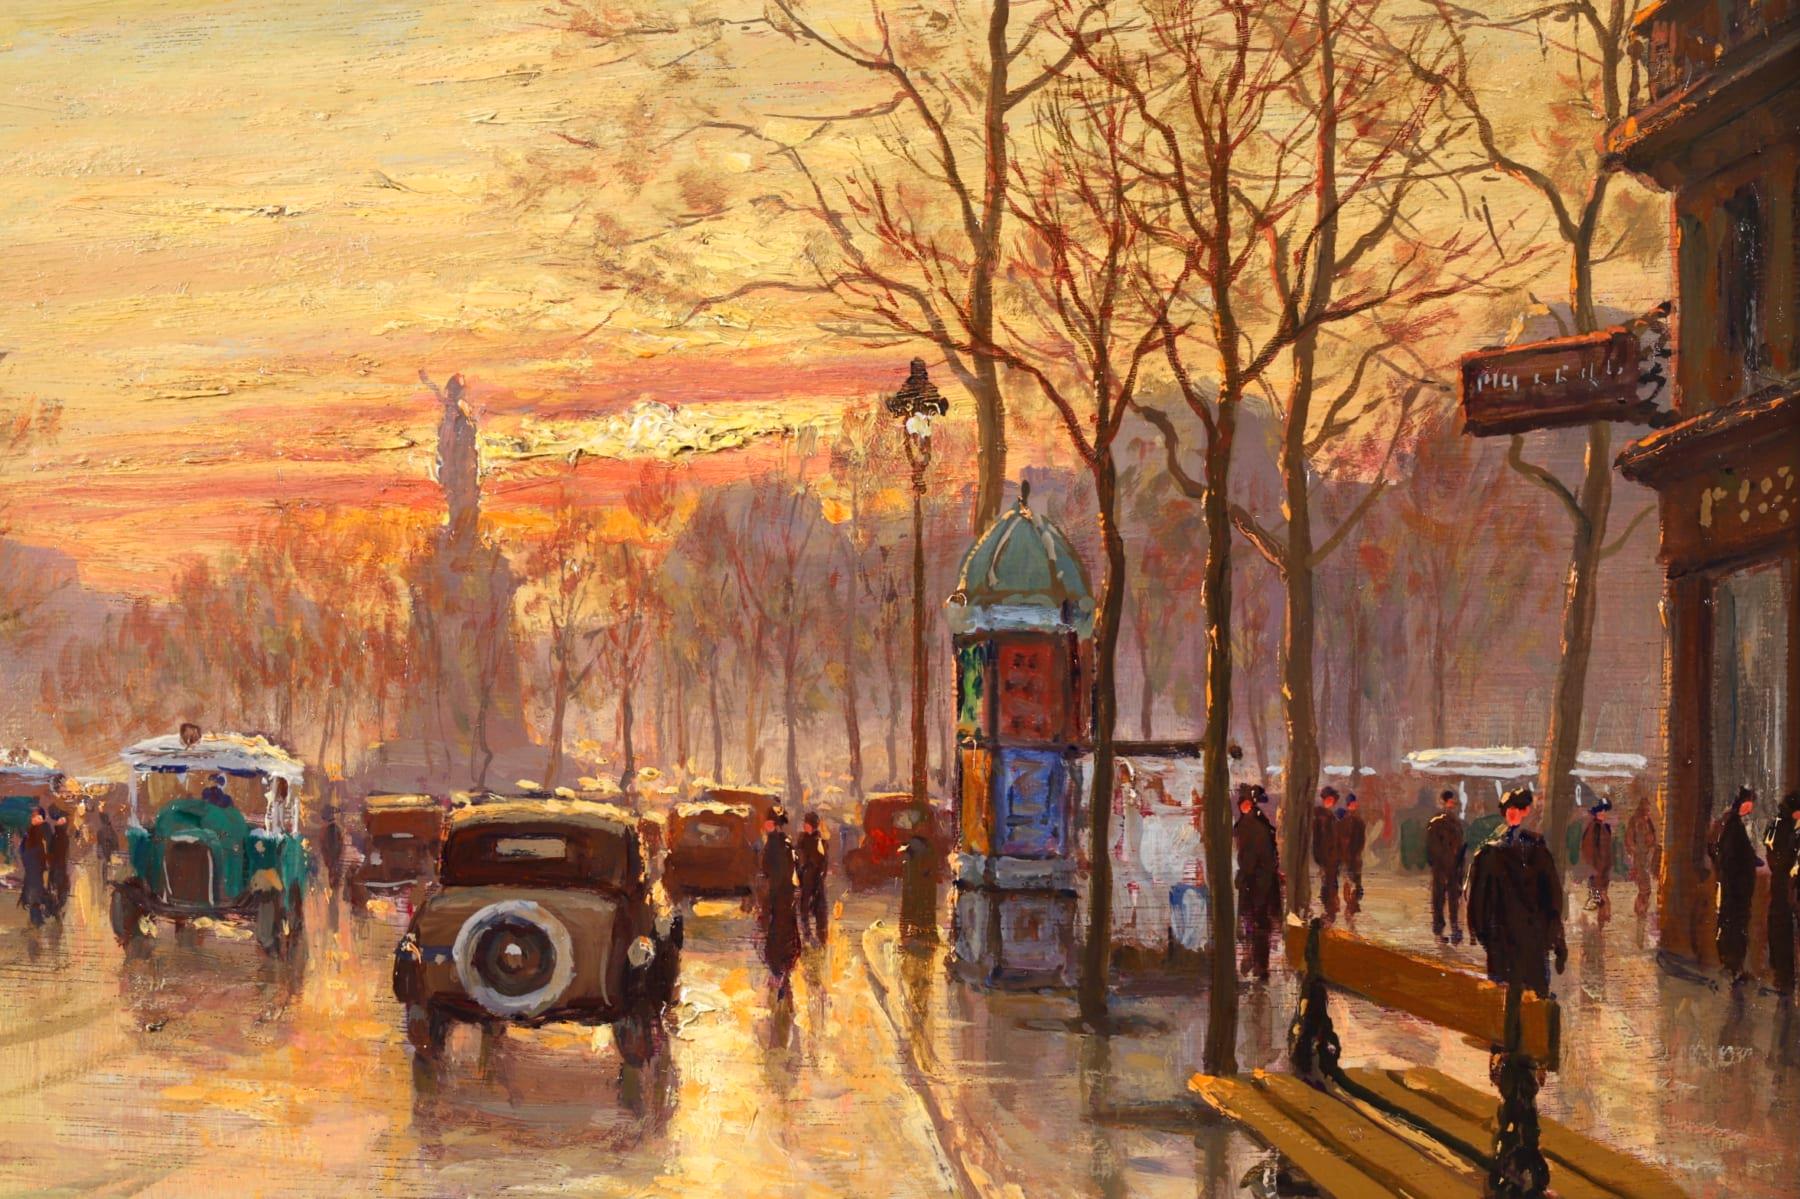 Sunset - Paris - Post Impressionist Oil, Figutres in Cityscape by Henry Malfroy 7